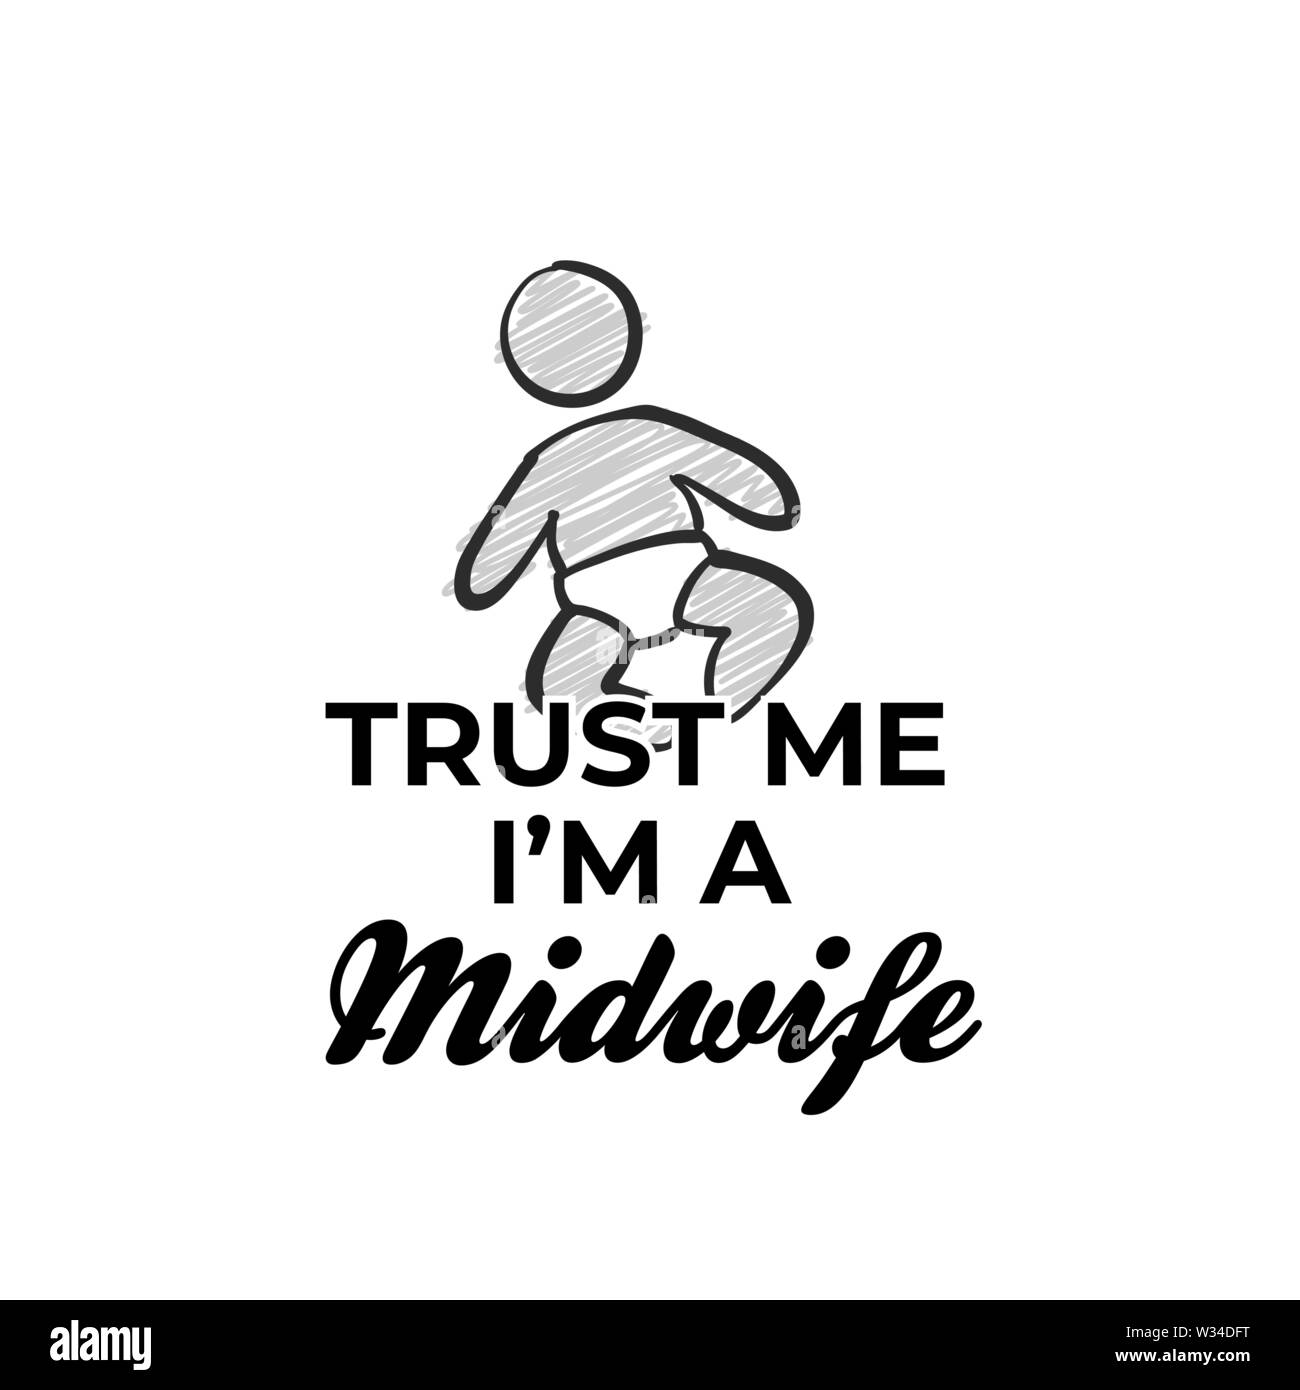 Trust me i'm a midwife icon. Hand-drawn logo symbol for t-shirt prints and online marketing. Stock Vector